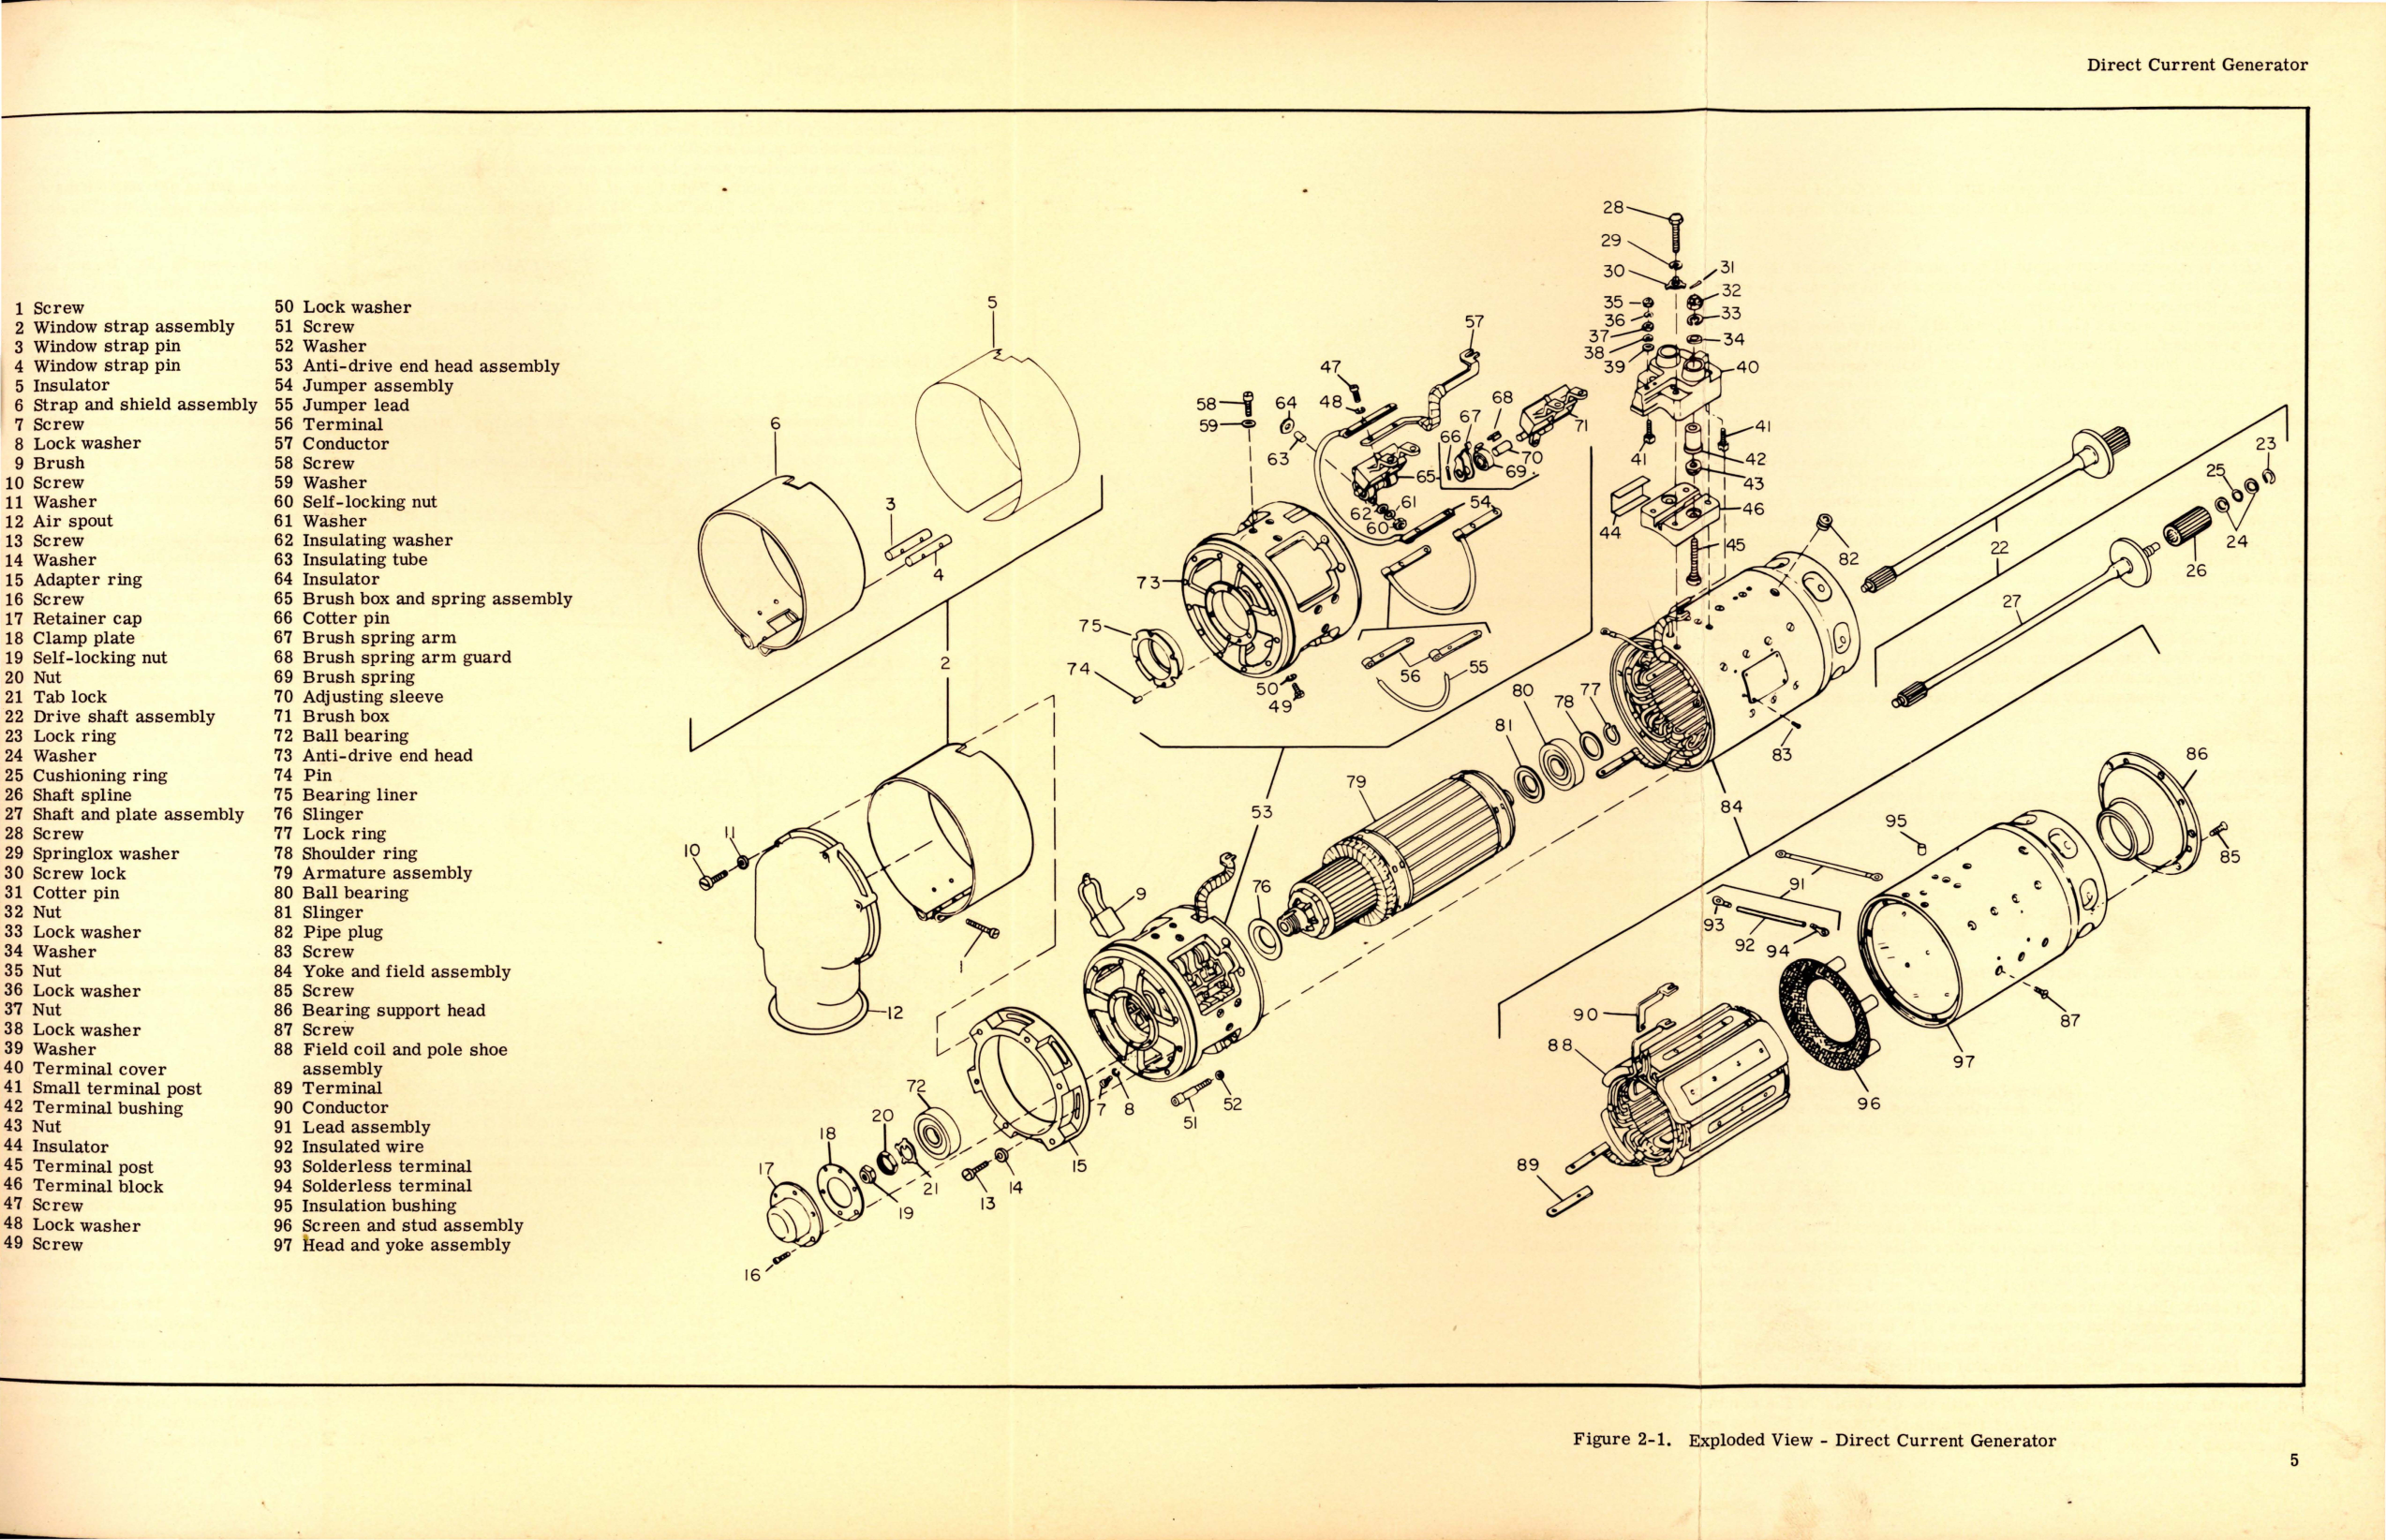 Sample page 9 from AirCorps Library document: Overhaul Instructions for Direct Current Generators